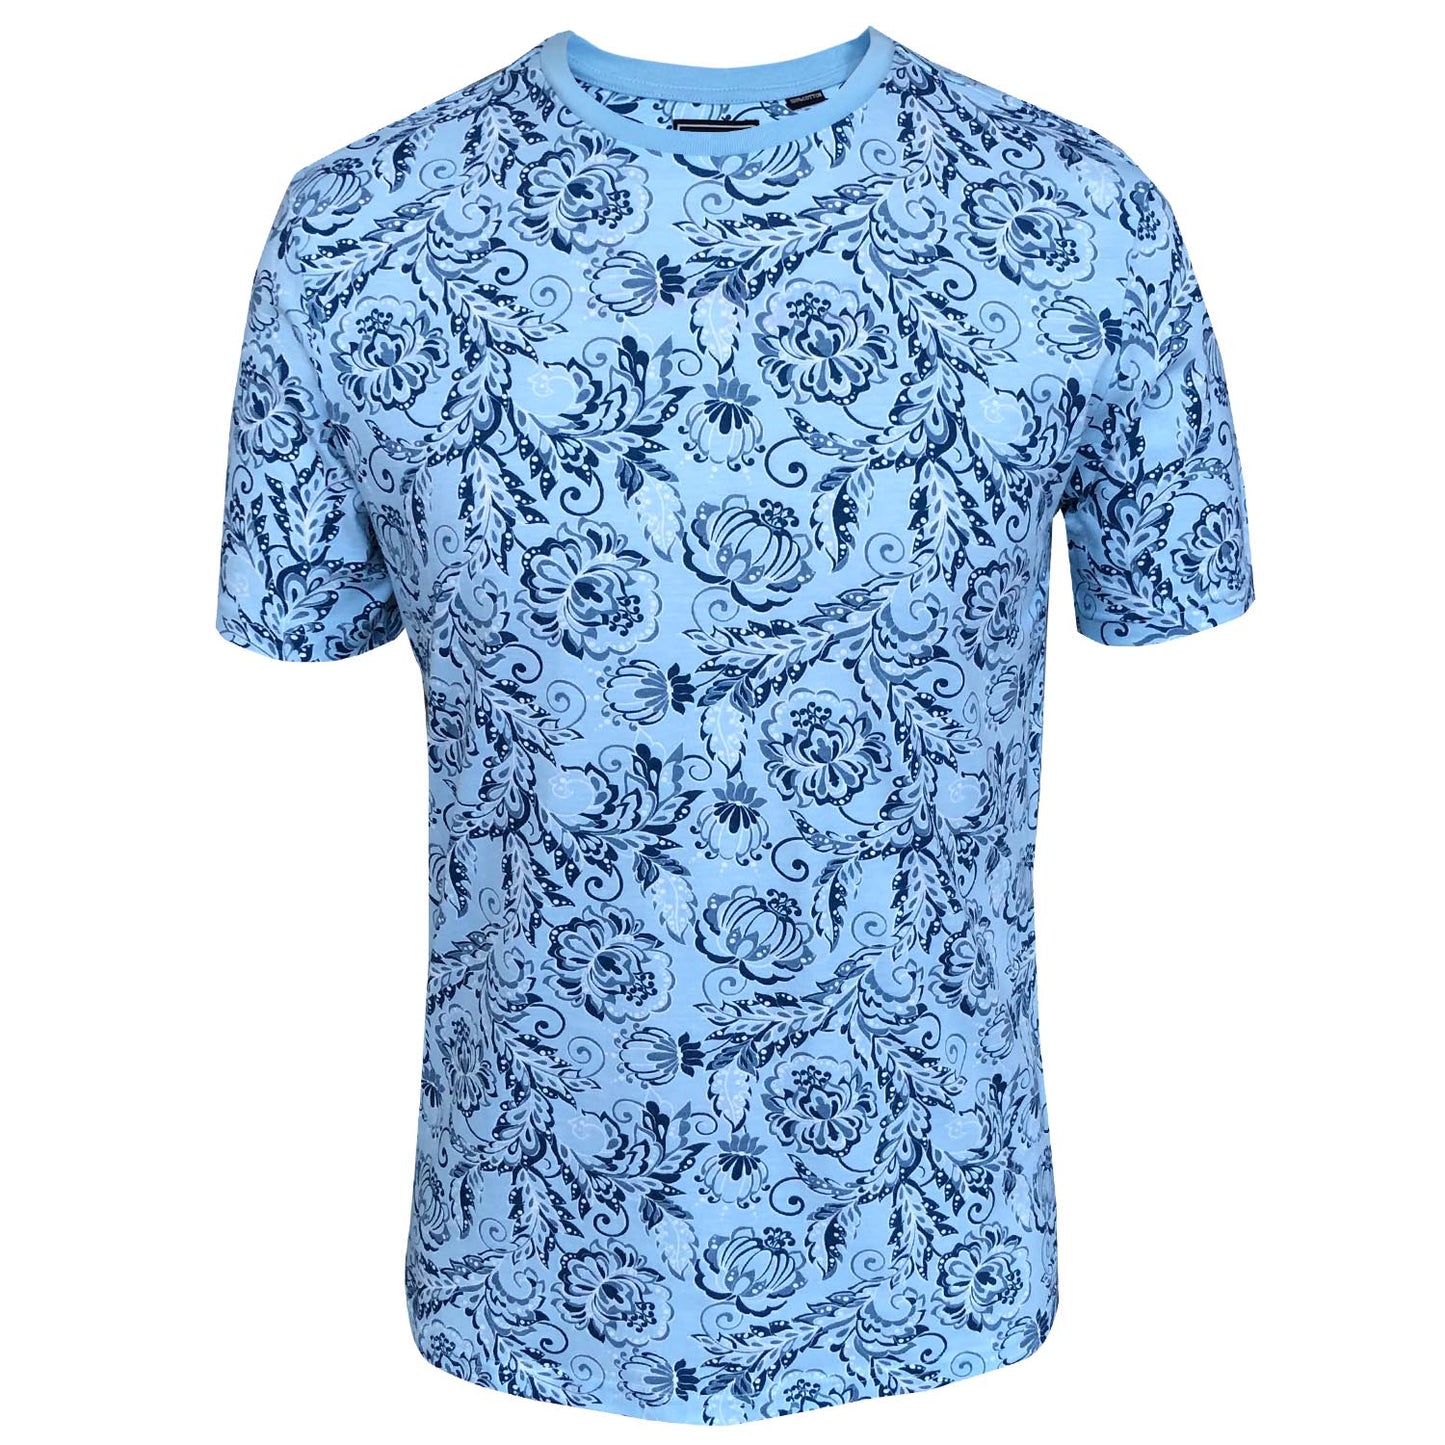 Outrage - All Over Print TOILE T-Shirt - LabelledUp.com